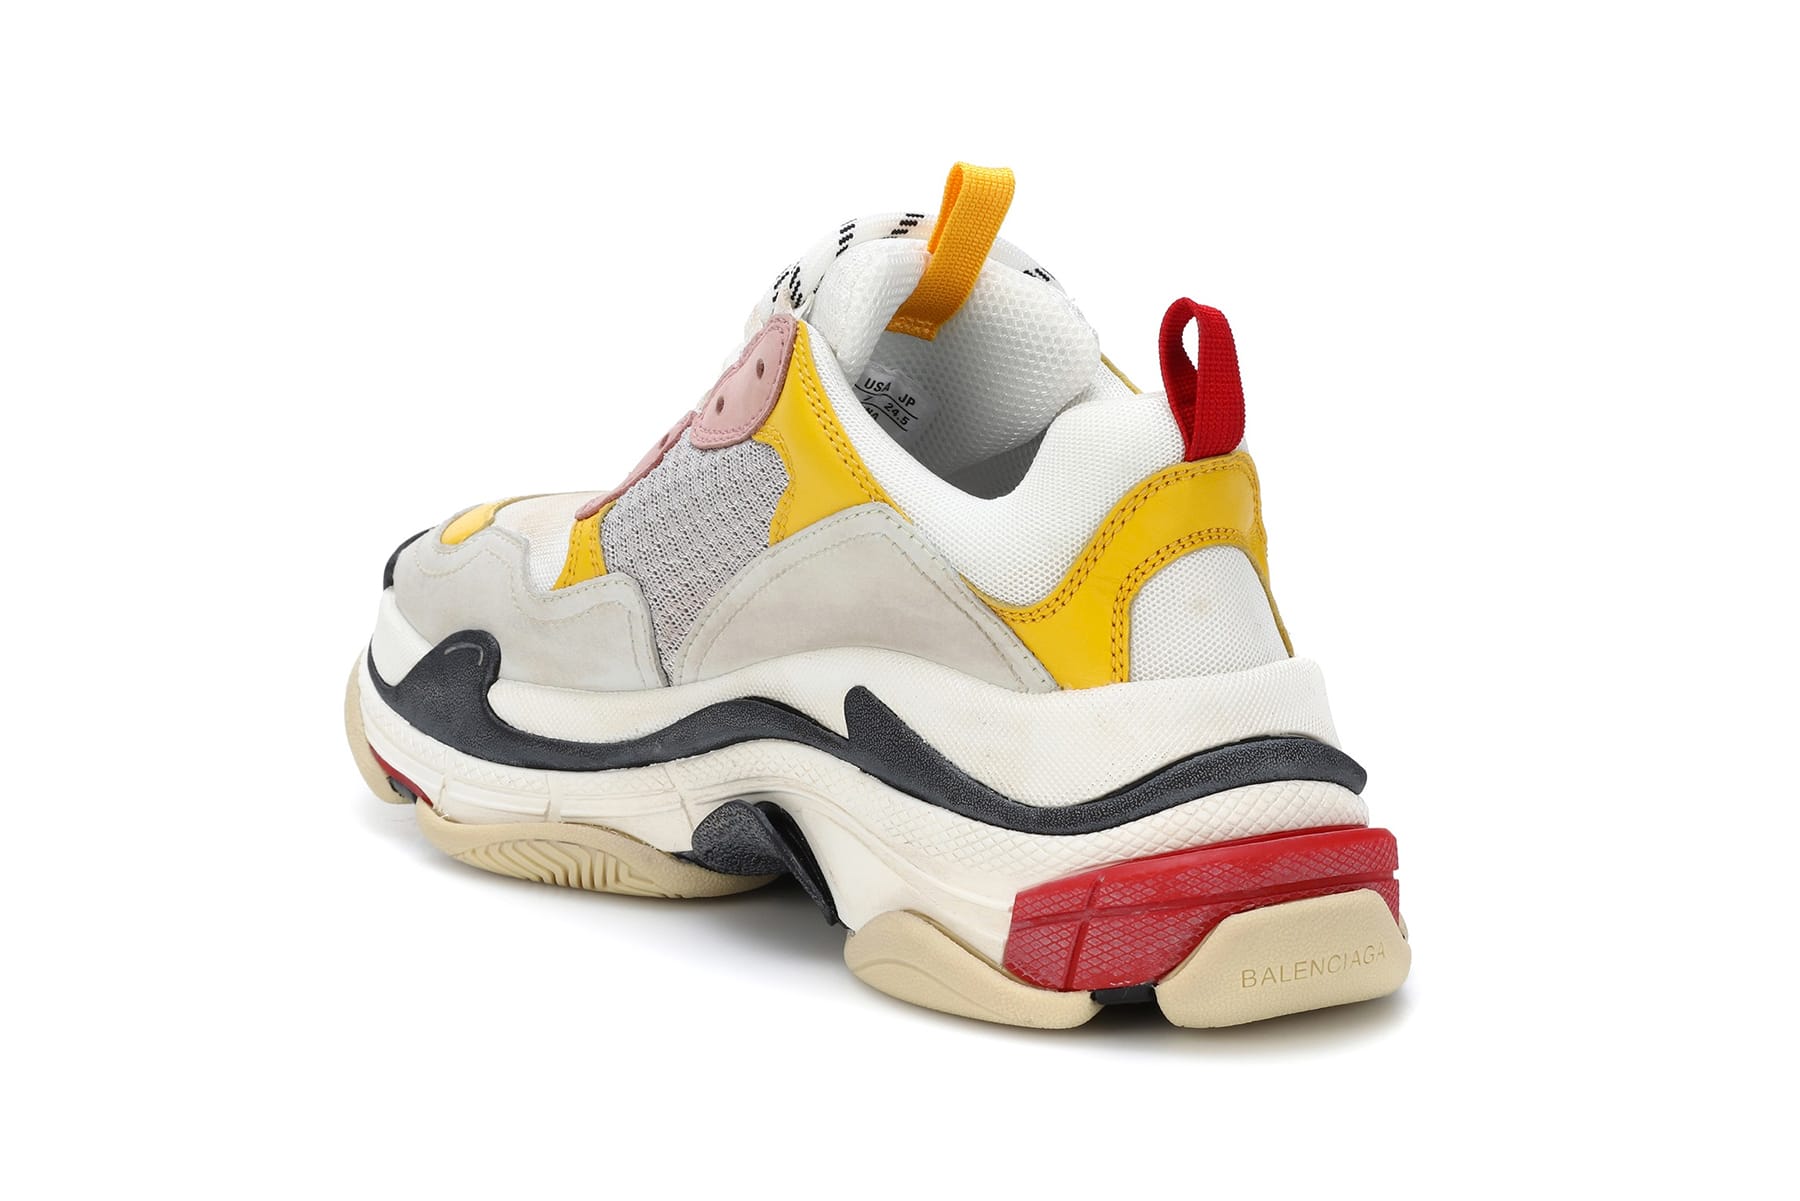 These Balenciaga Triple-S Shoes Have 